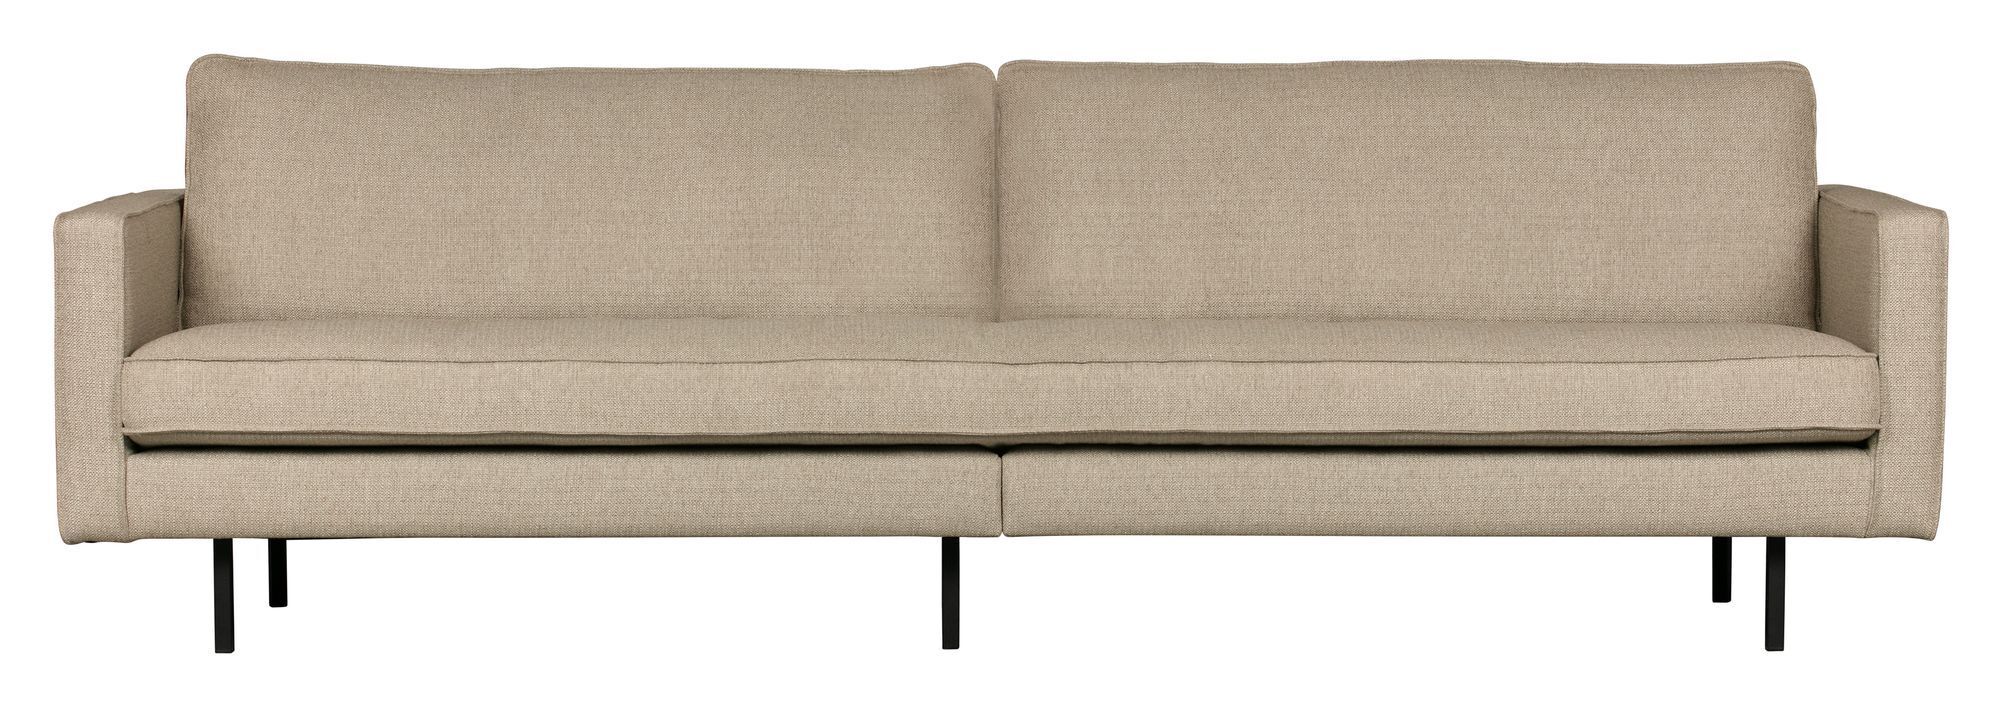 BePureHome Rodeo Stretched 3-pers. Sofa - Sahara   Unoliving